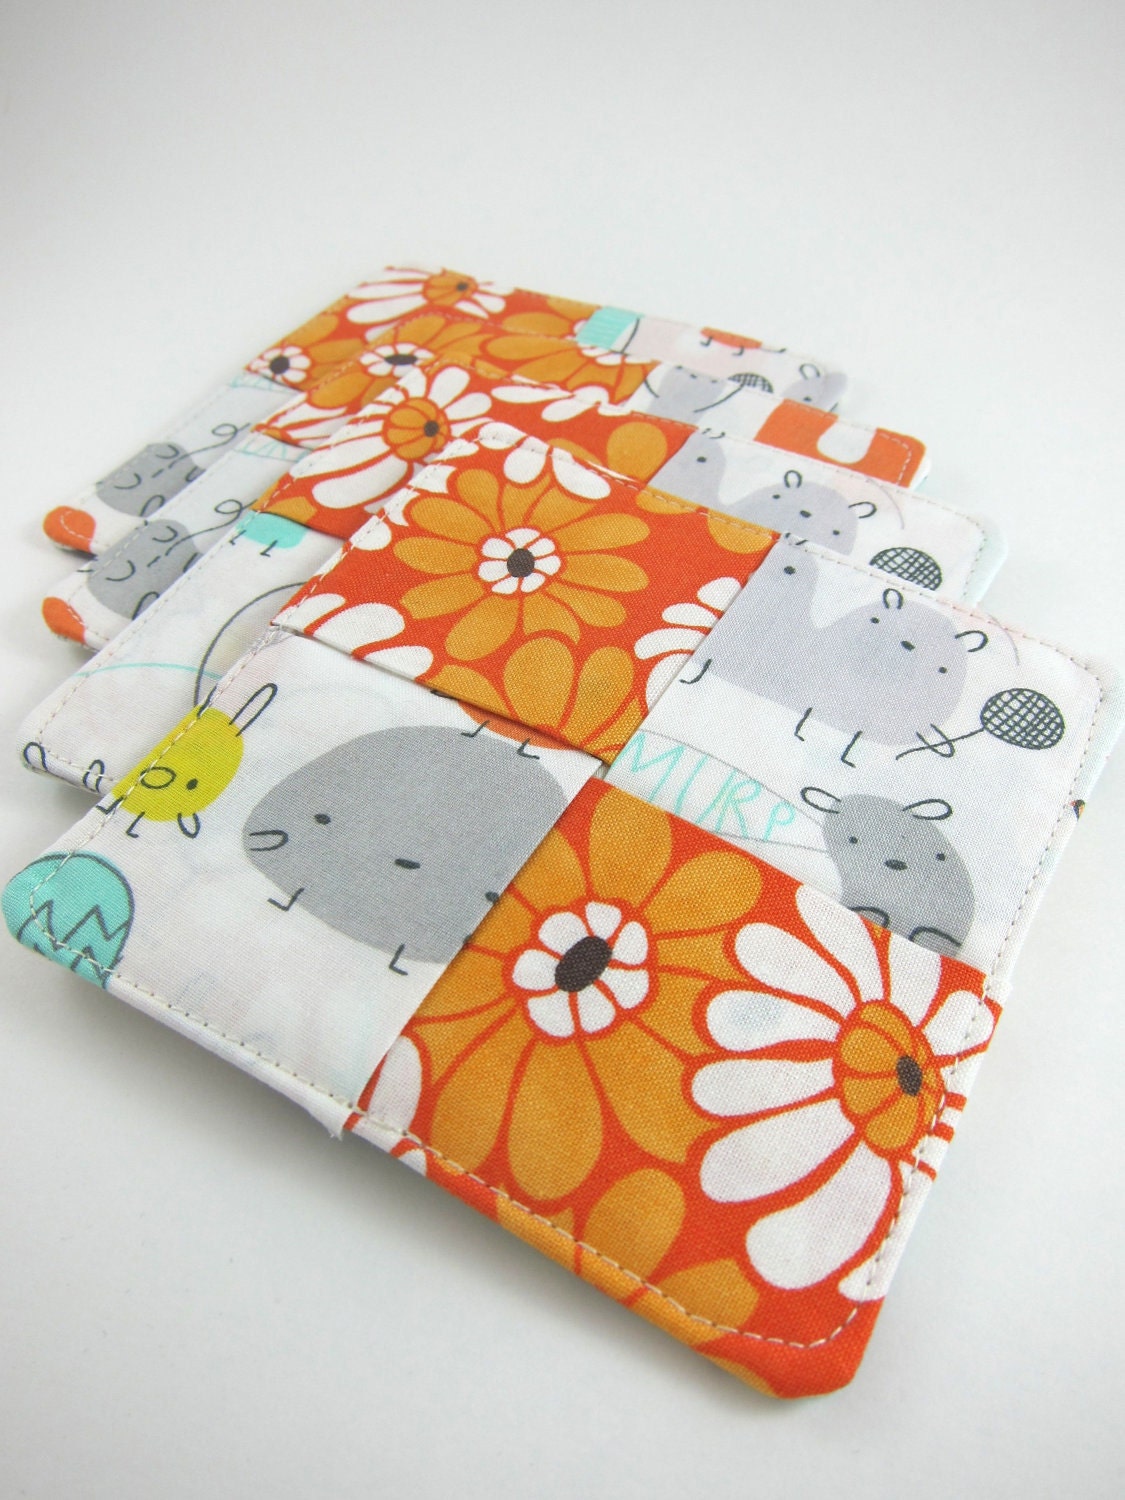 Housewarming GIft Fabric Coasters Set of 4 - Reversible with Storage Bag - Cute Monsters and Orange Flowers